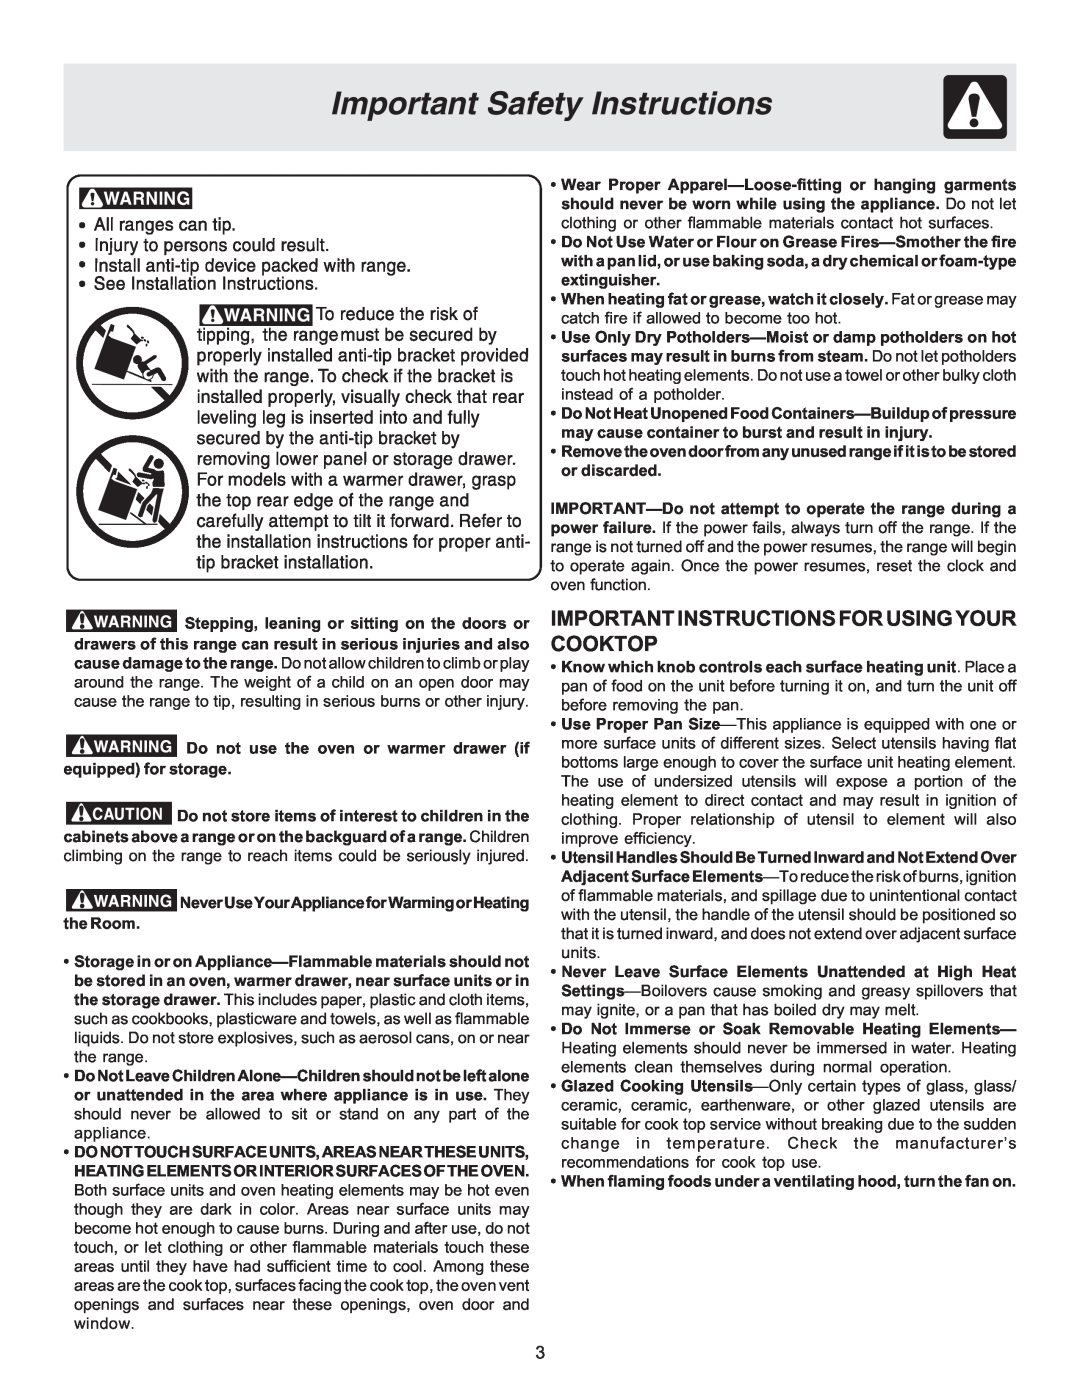 Crosley ES100 important safety instructions Important Instructions For Using Your Cooktop, Important Safety Instructions 